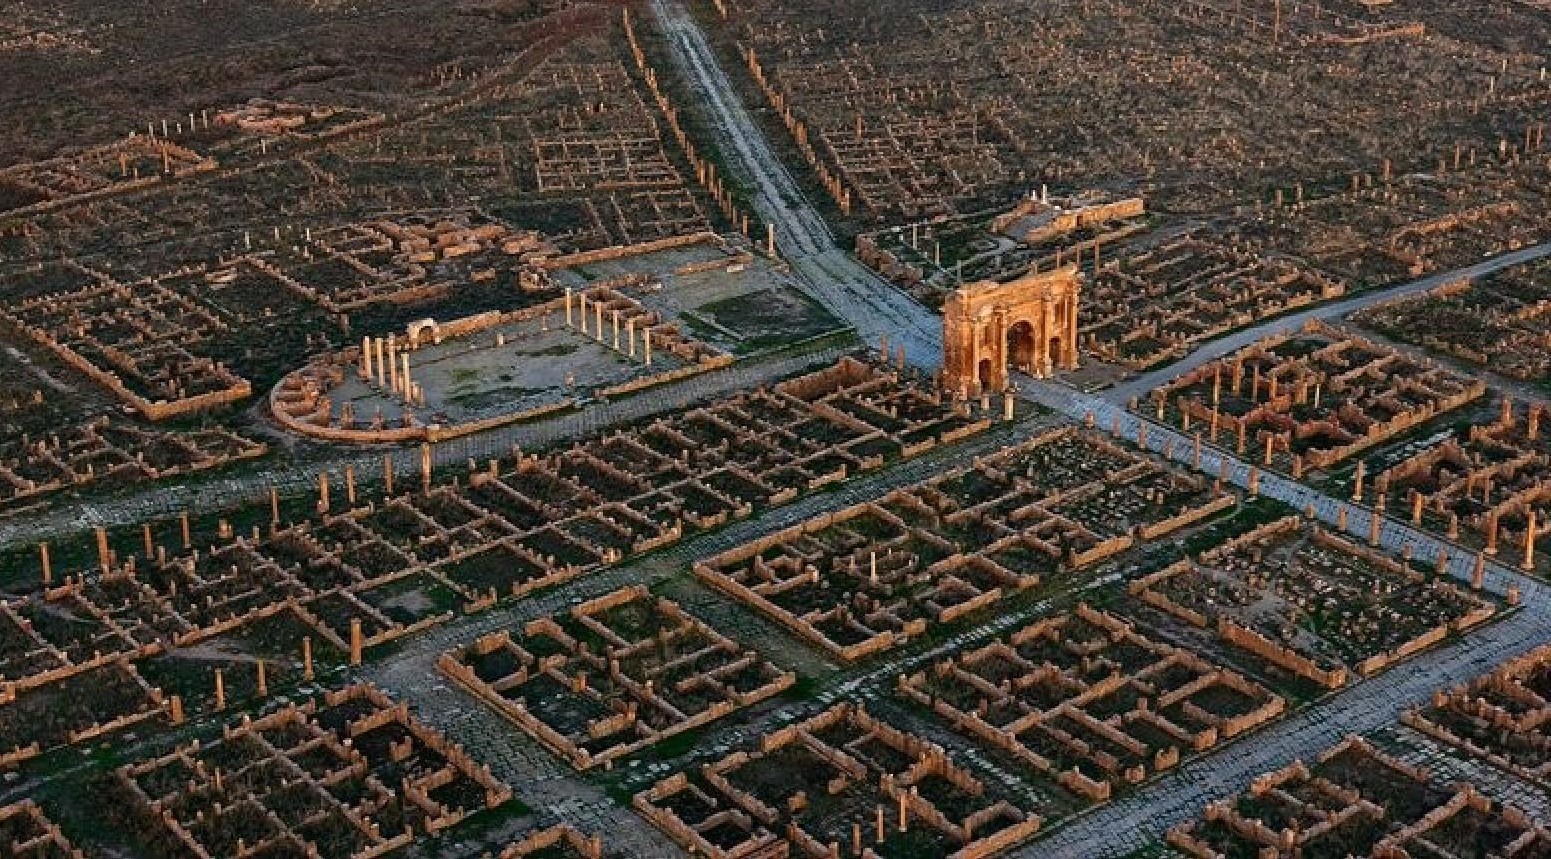 Historical View of the city - Timgad